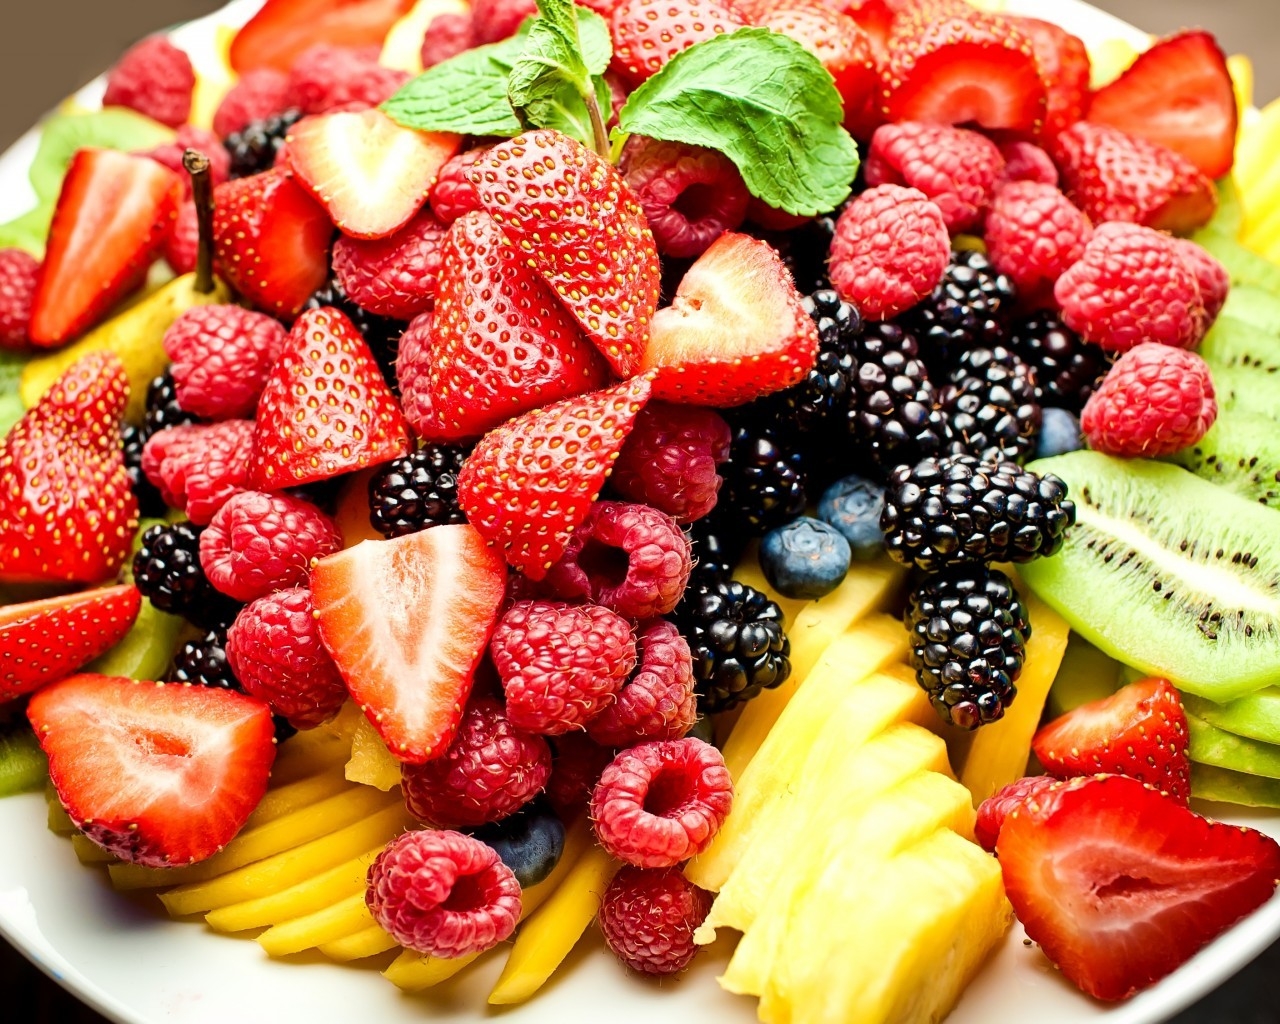 Fruits Plate for 1280 x 1024 resolution